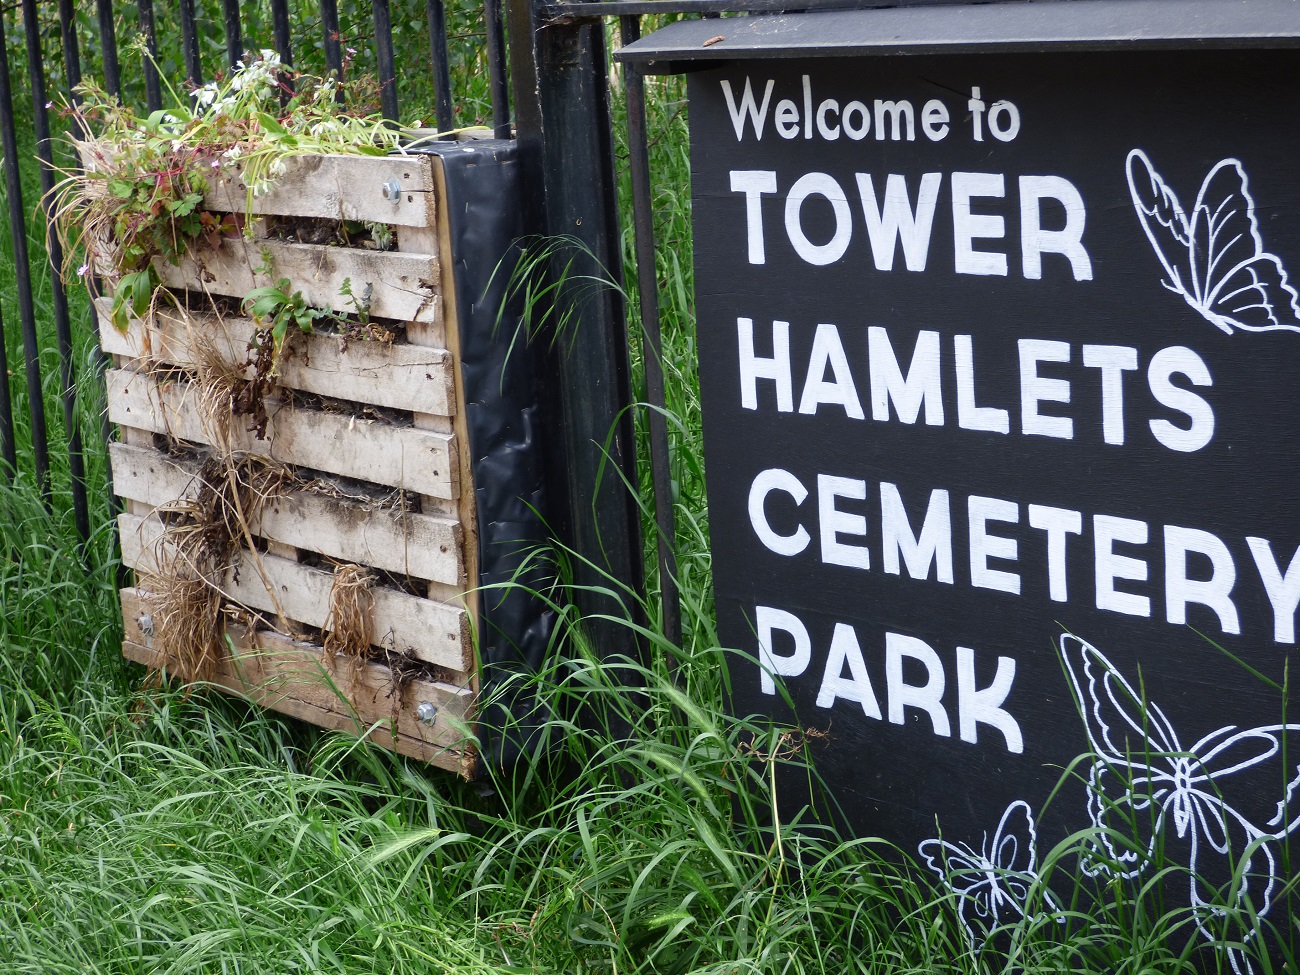 20160524_Tower-Hamlets_Tower-Hamlets-Cemetery-Park_The-Welcome-Gate